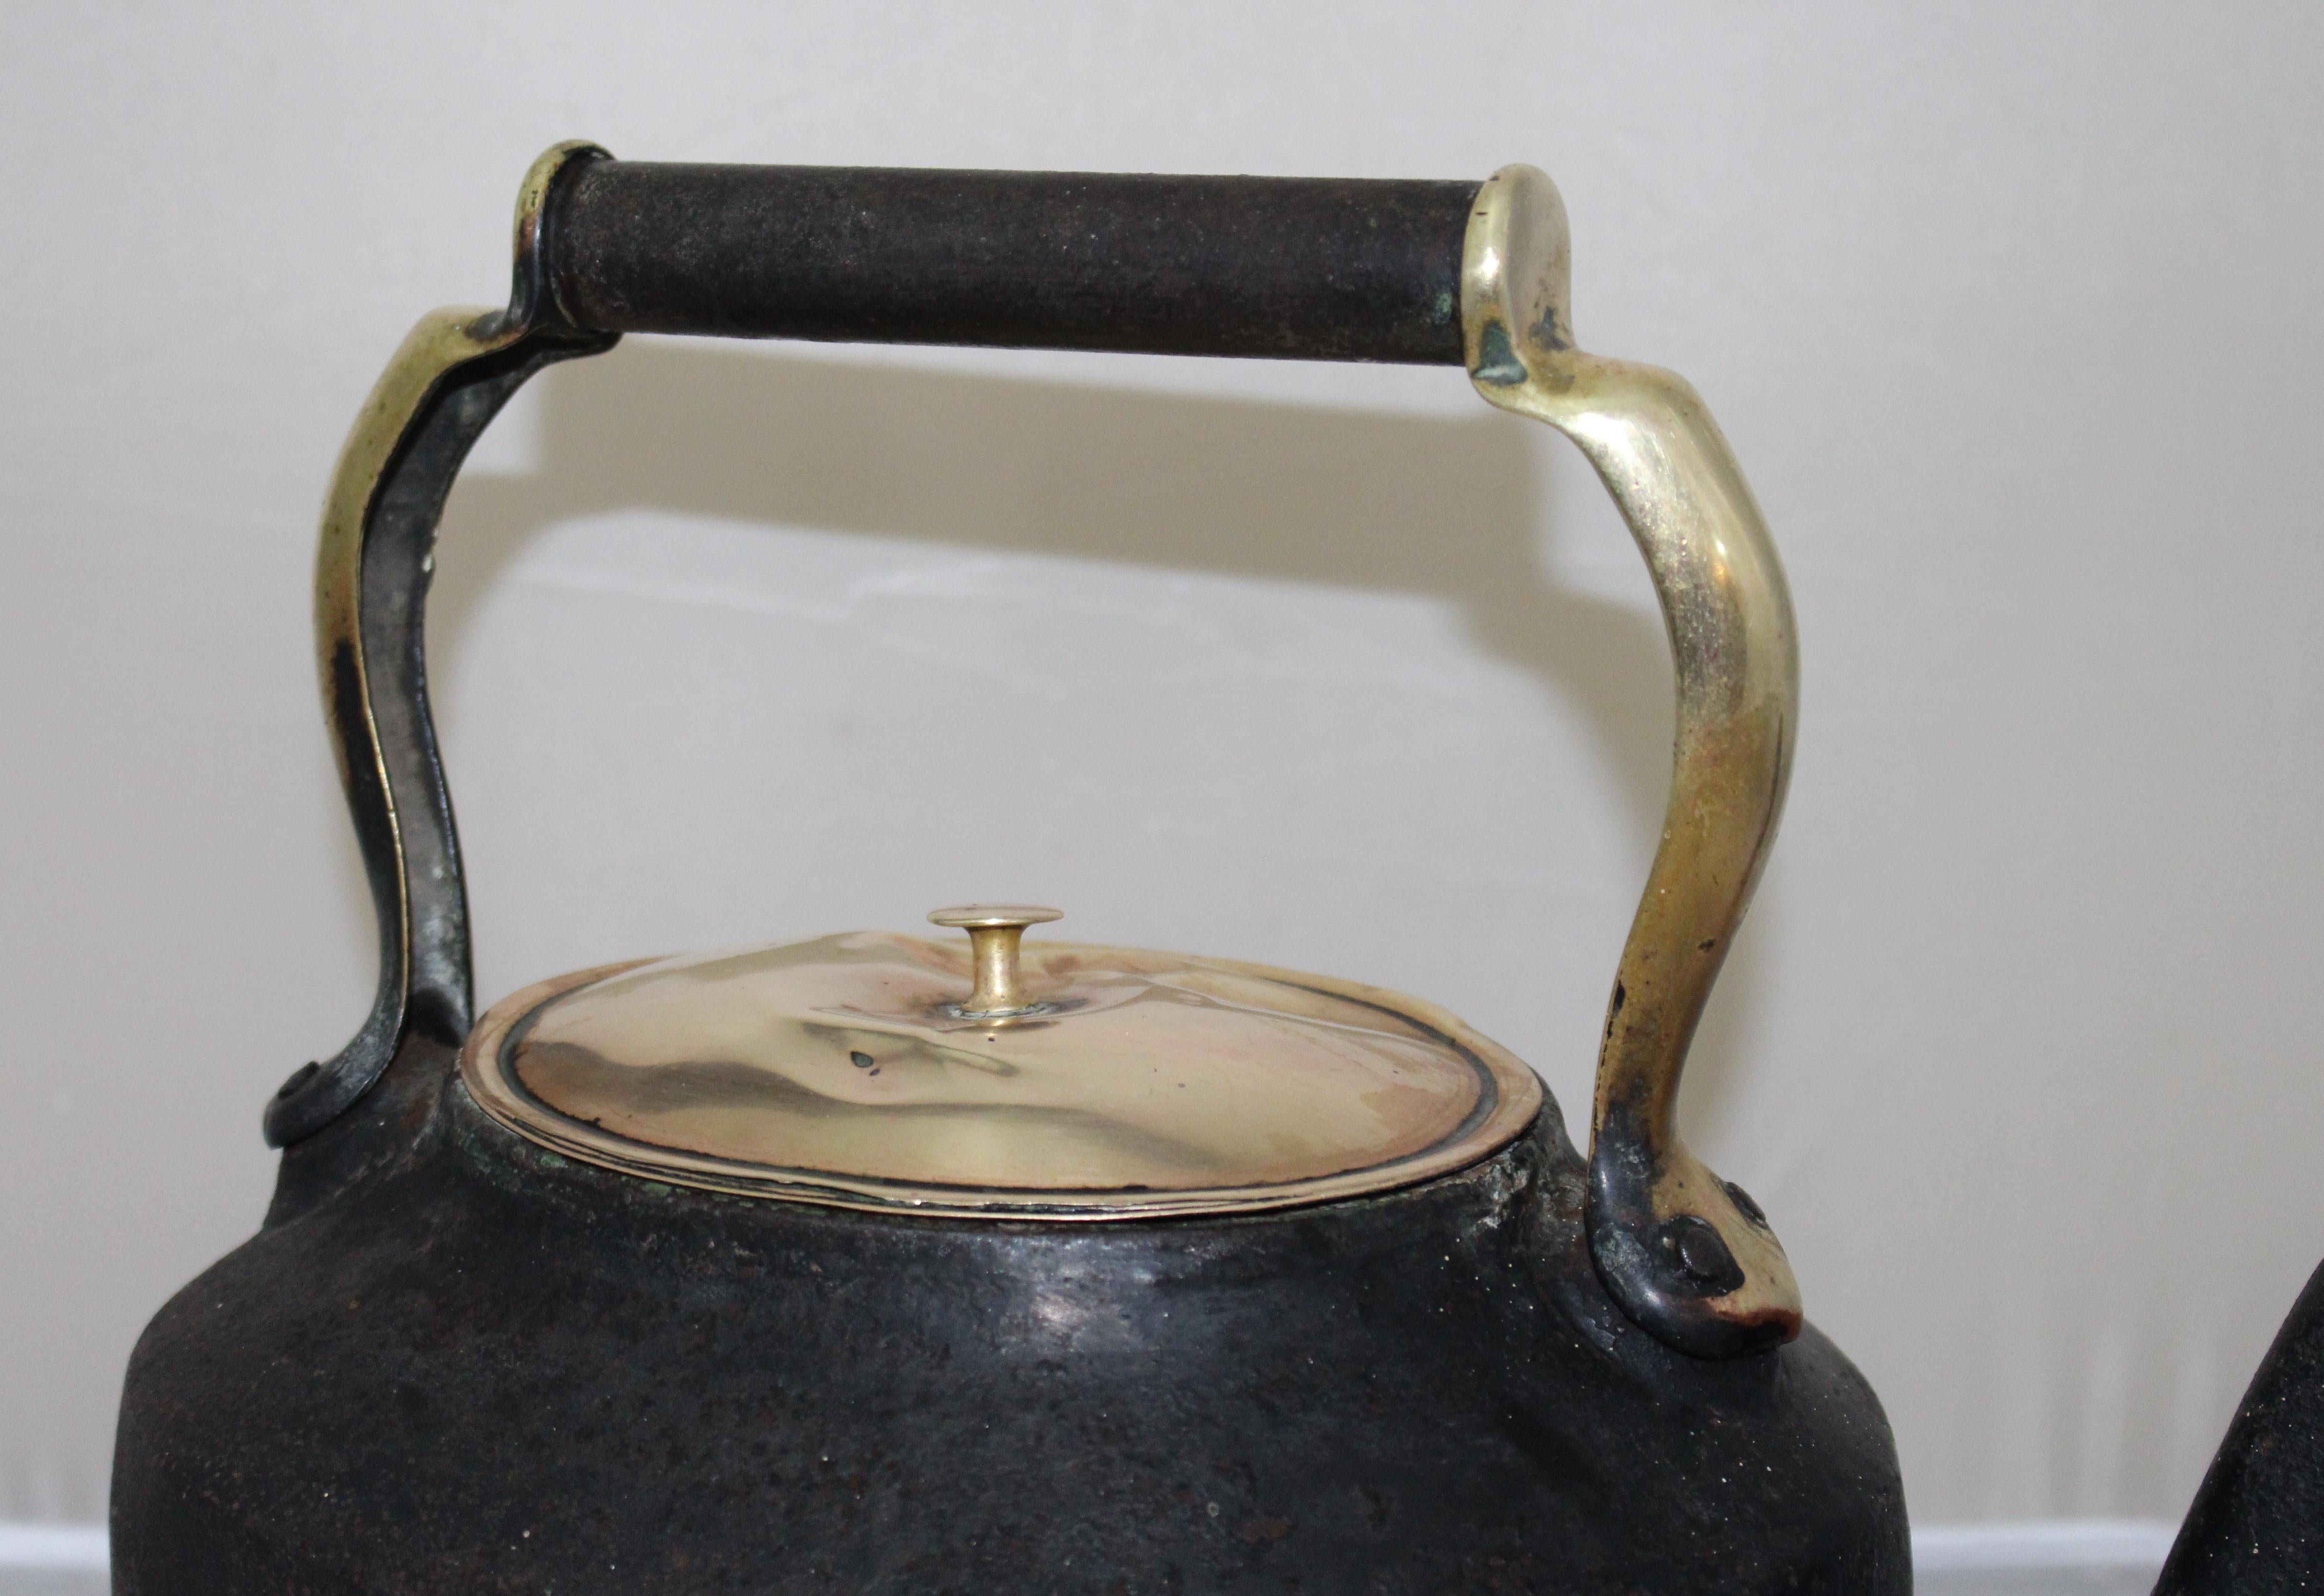 Manufacturers Baldwin (stamped to underside)
Origin made in England
Composition cast iron body, brass to handle and lid
Size: 34 x 20 x 28 (H) cm / 13 1/2 x 8 x 11 (H) in
Condition: Good condition commensurate with age. Very heavy. Some denting